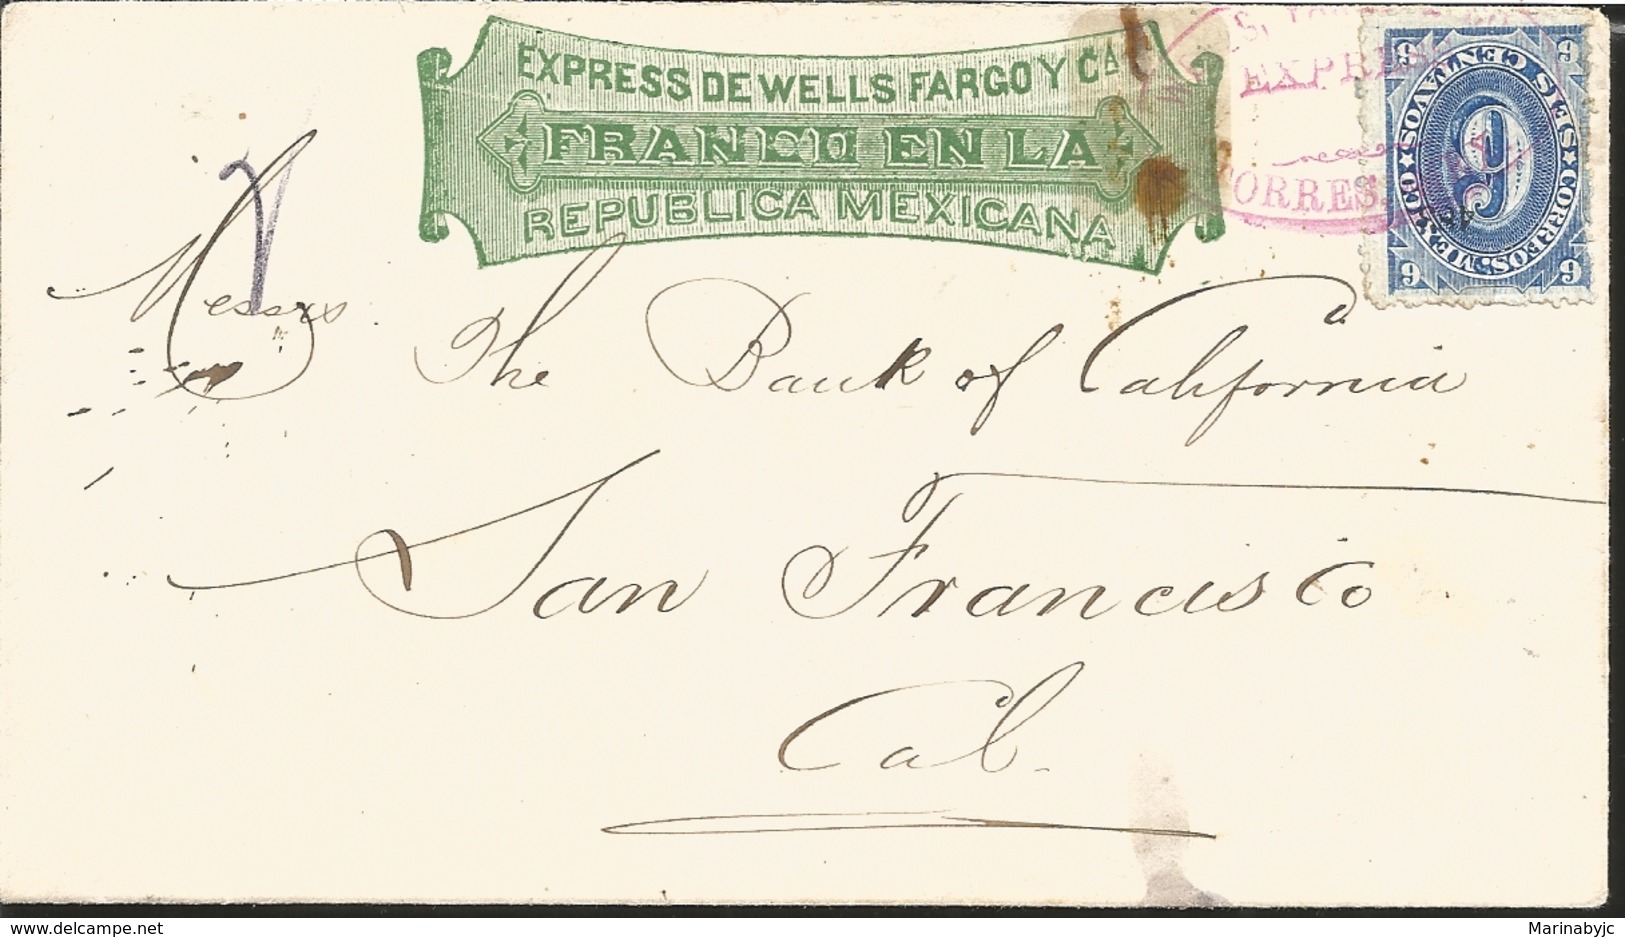 J) 1883 MEXICO, EXPRESS WELL FARGO, 9 CENTS NUMERAL, CIRCULATED COVER, FROM MEXICO TO CALIFORNIA - Mexico